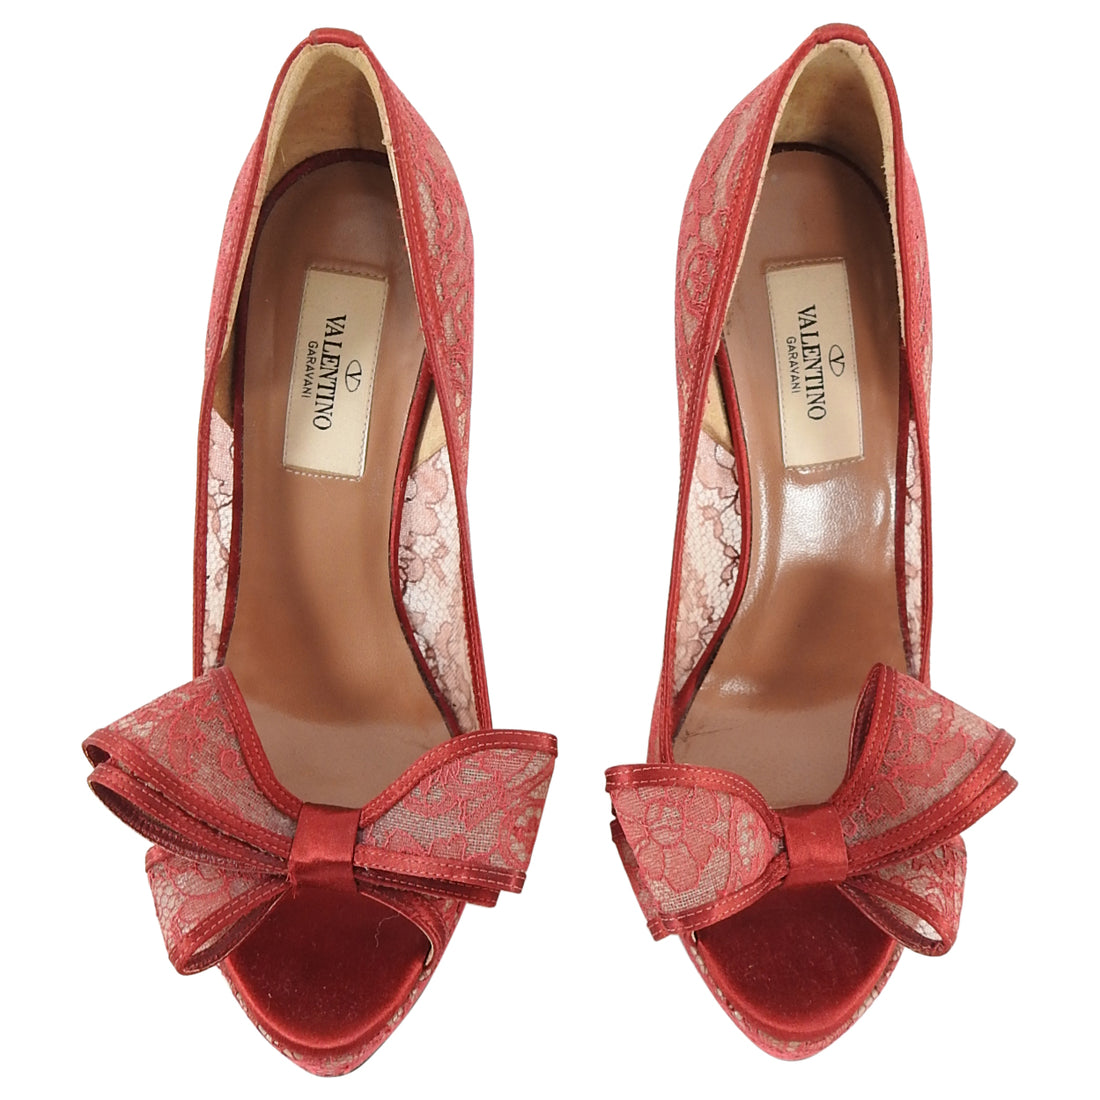 Valentino Red Lace Bow Satin Peep Toe Pumps - 36.5